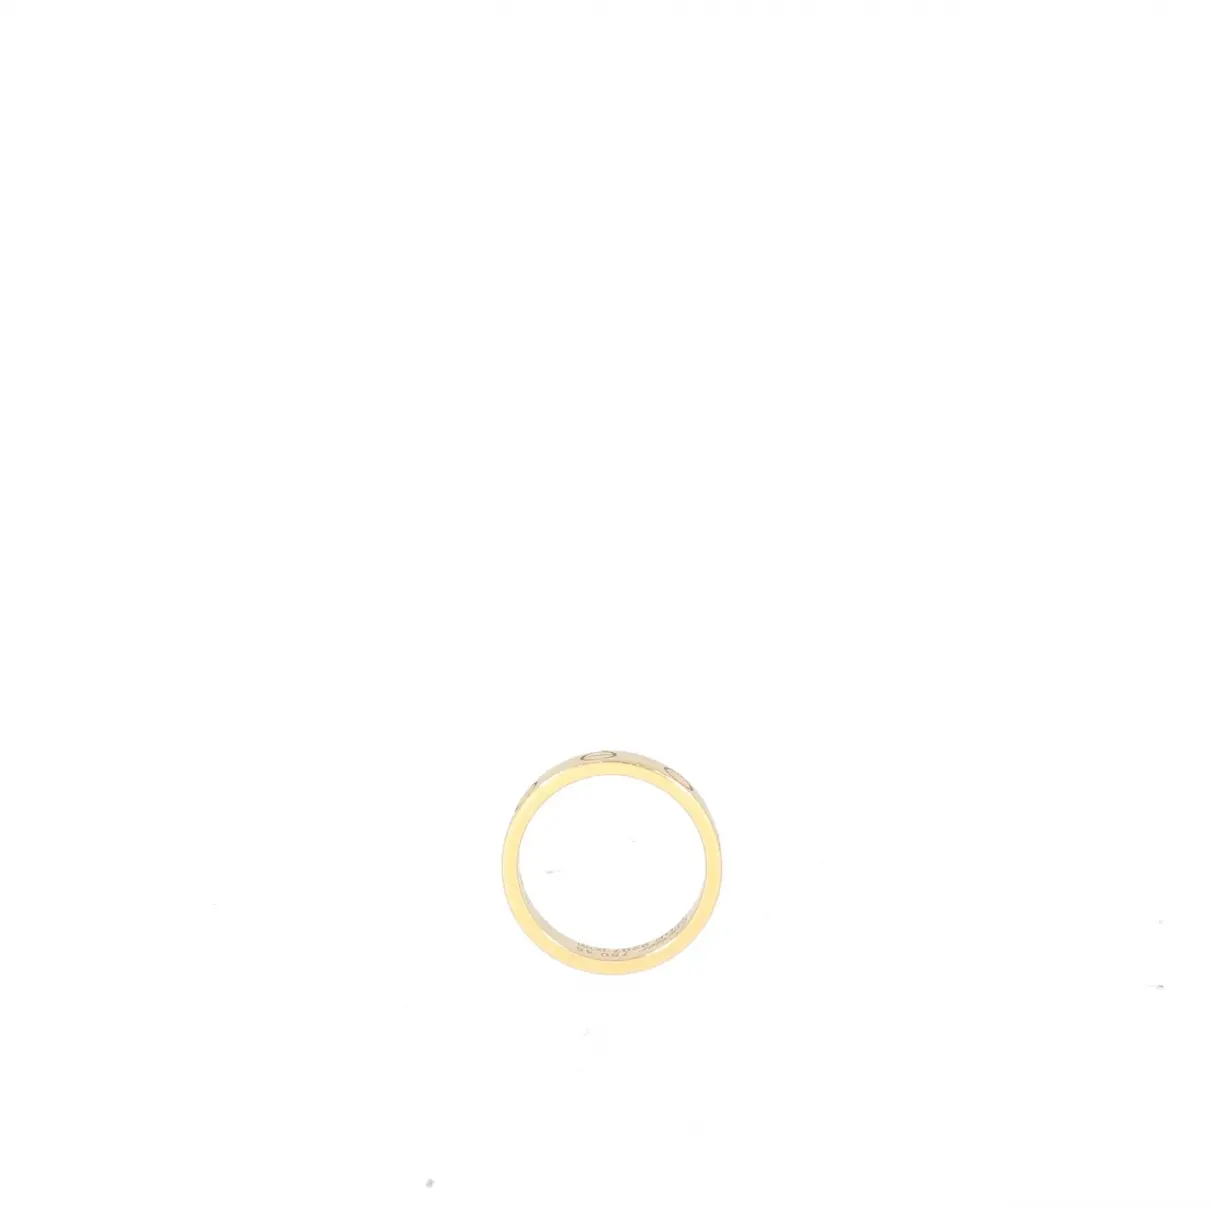 Buy Cartier Love yellow gold ring online